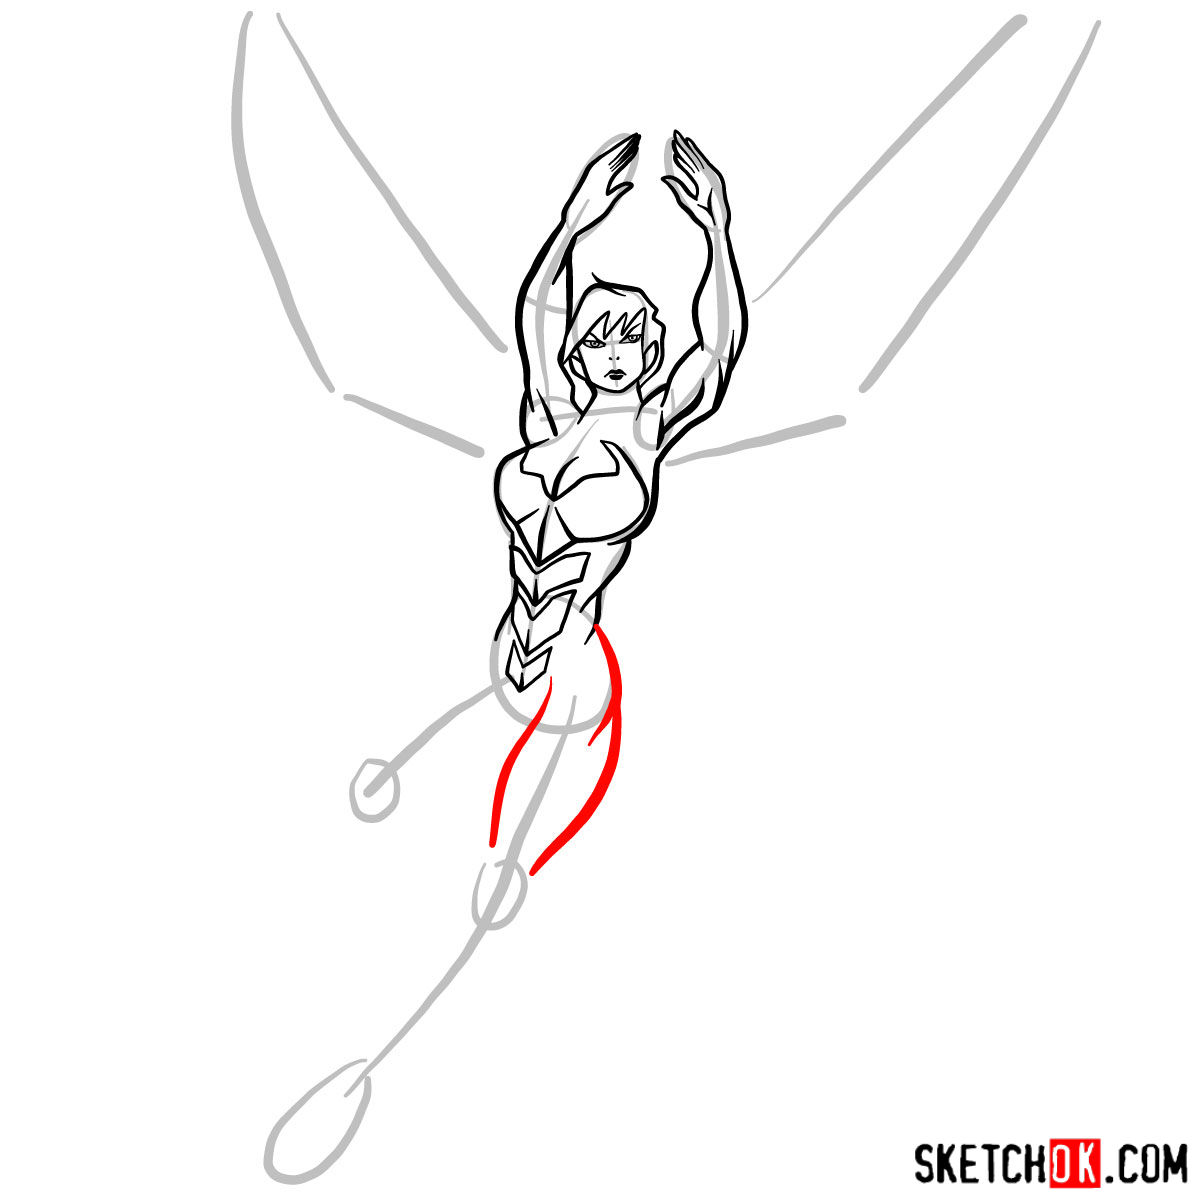 How to draw Wasp, Janet van Dyne from Marvel Comics - step 09